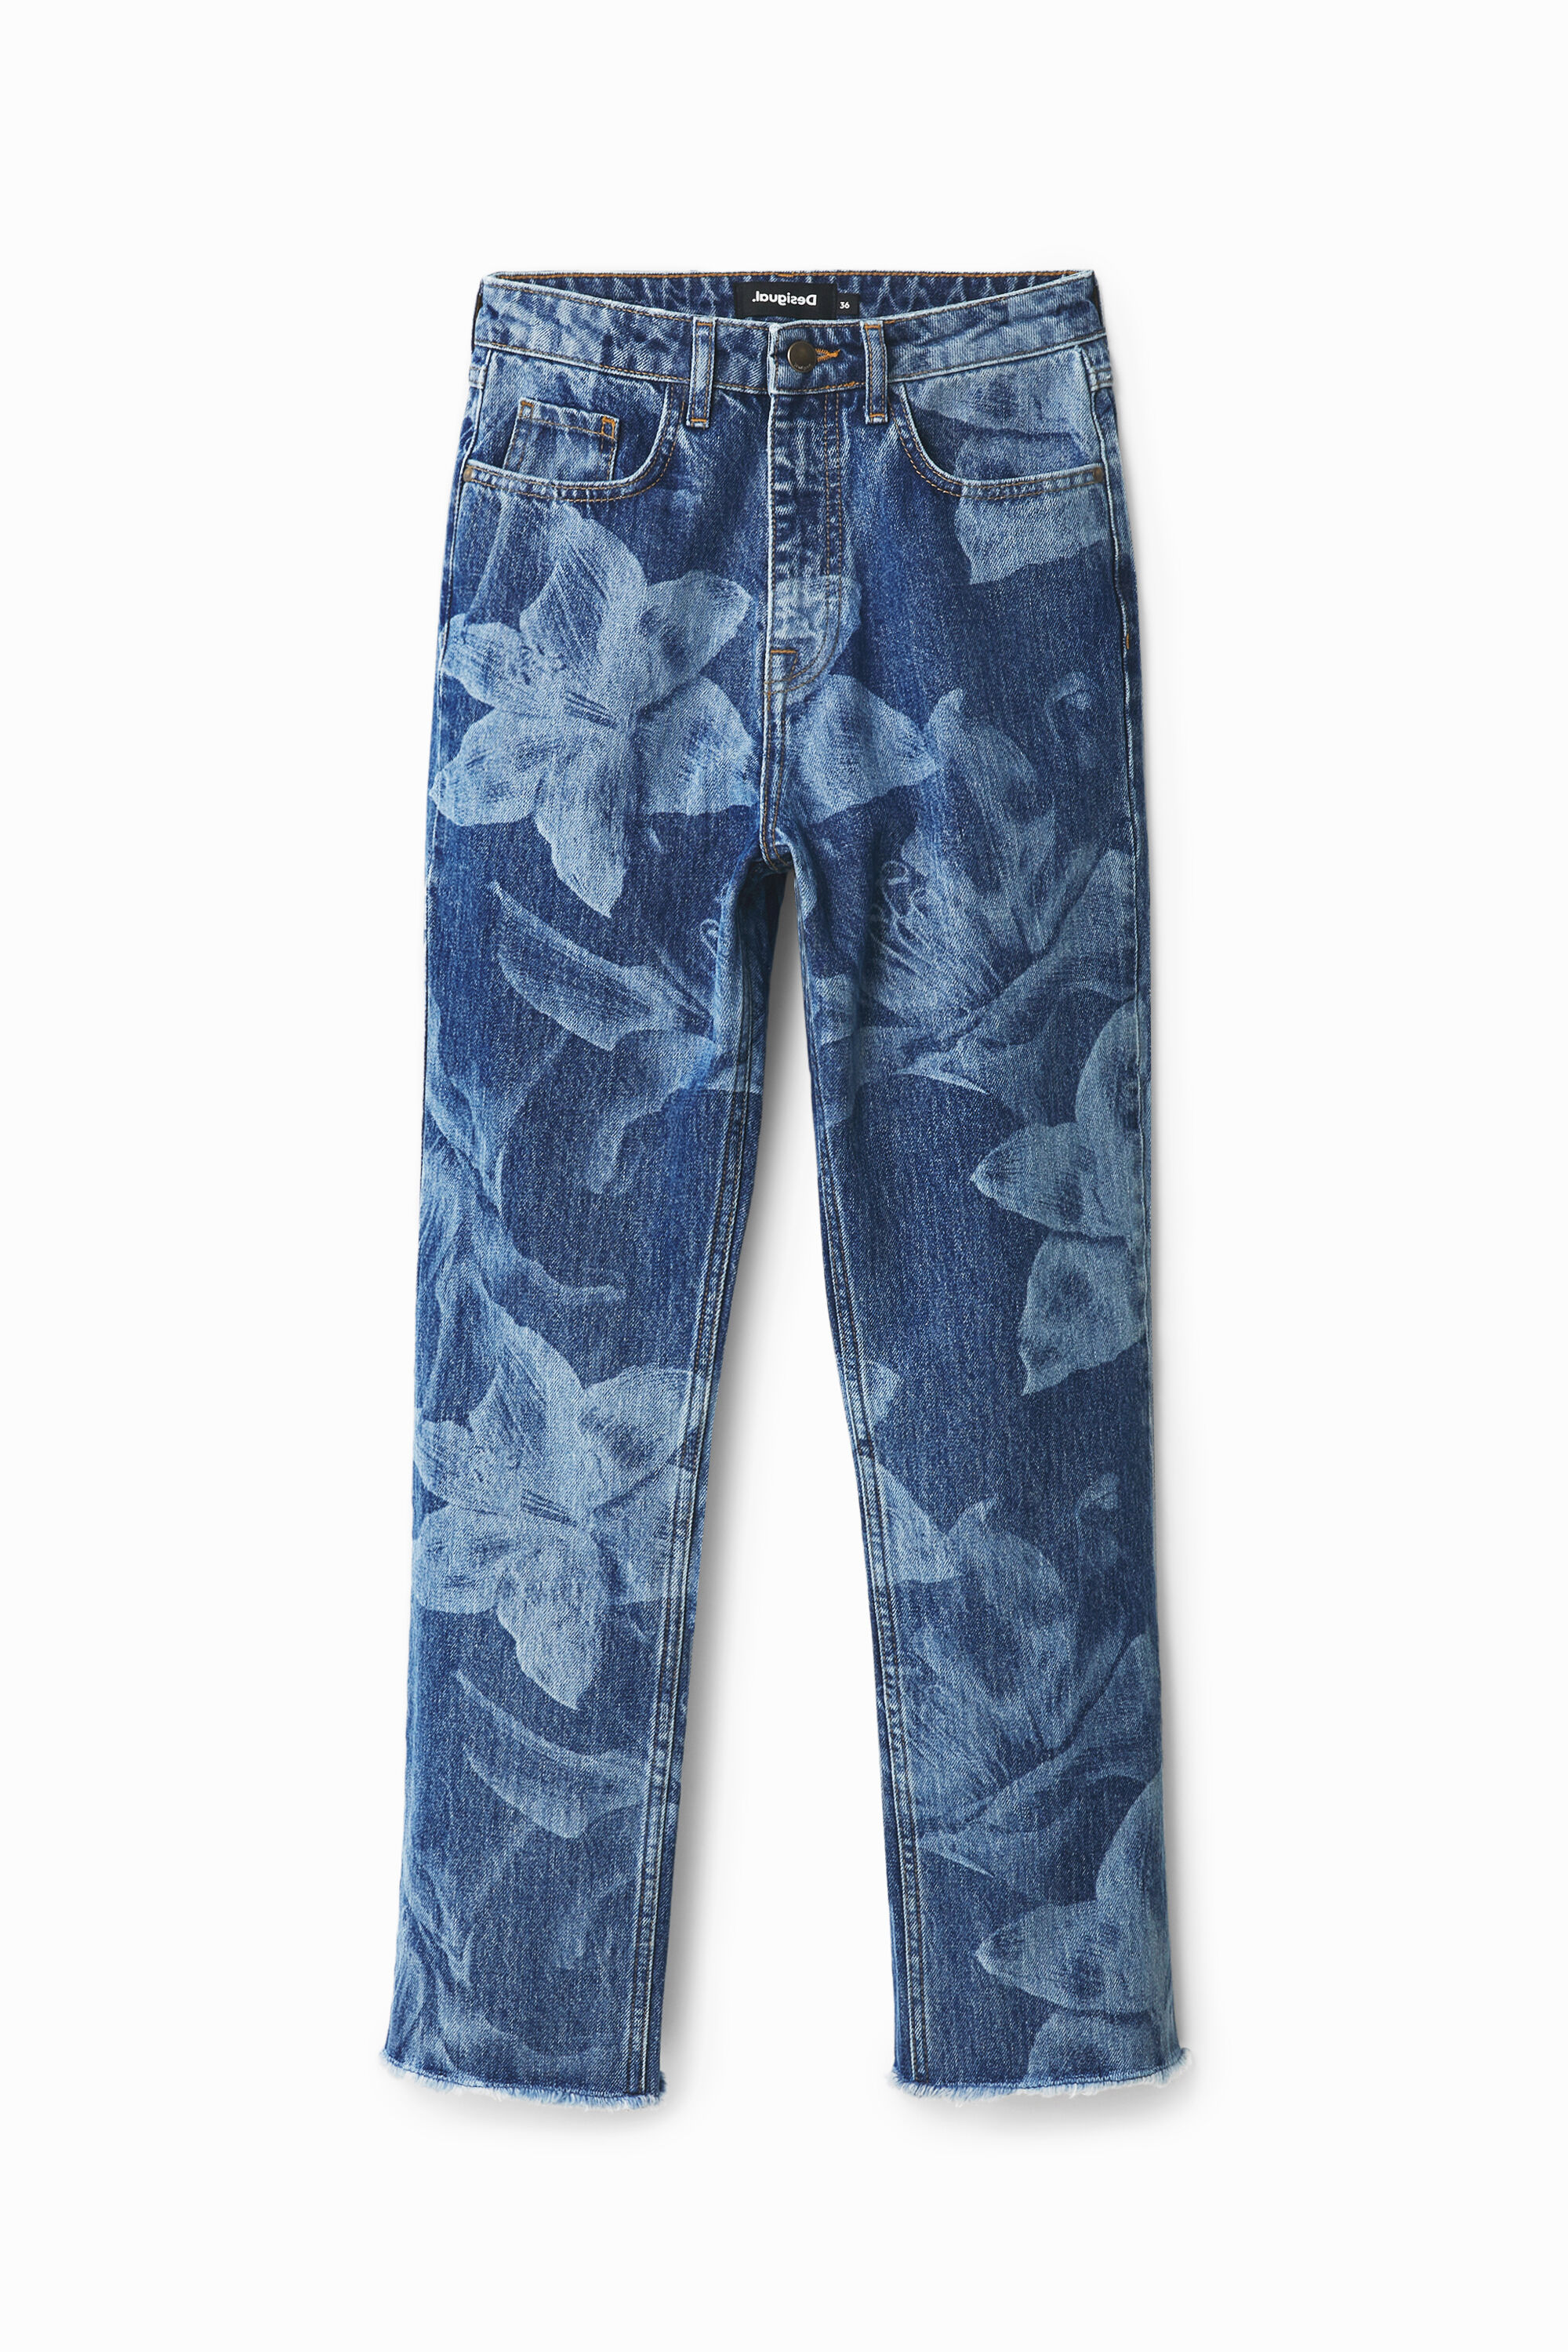 Desigual Straight Cropped Jeans In Blue